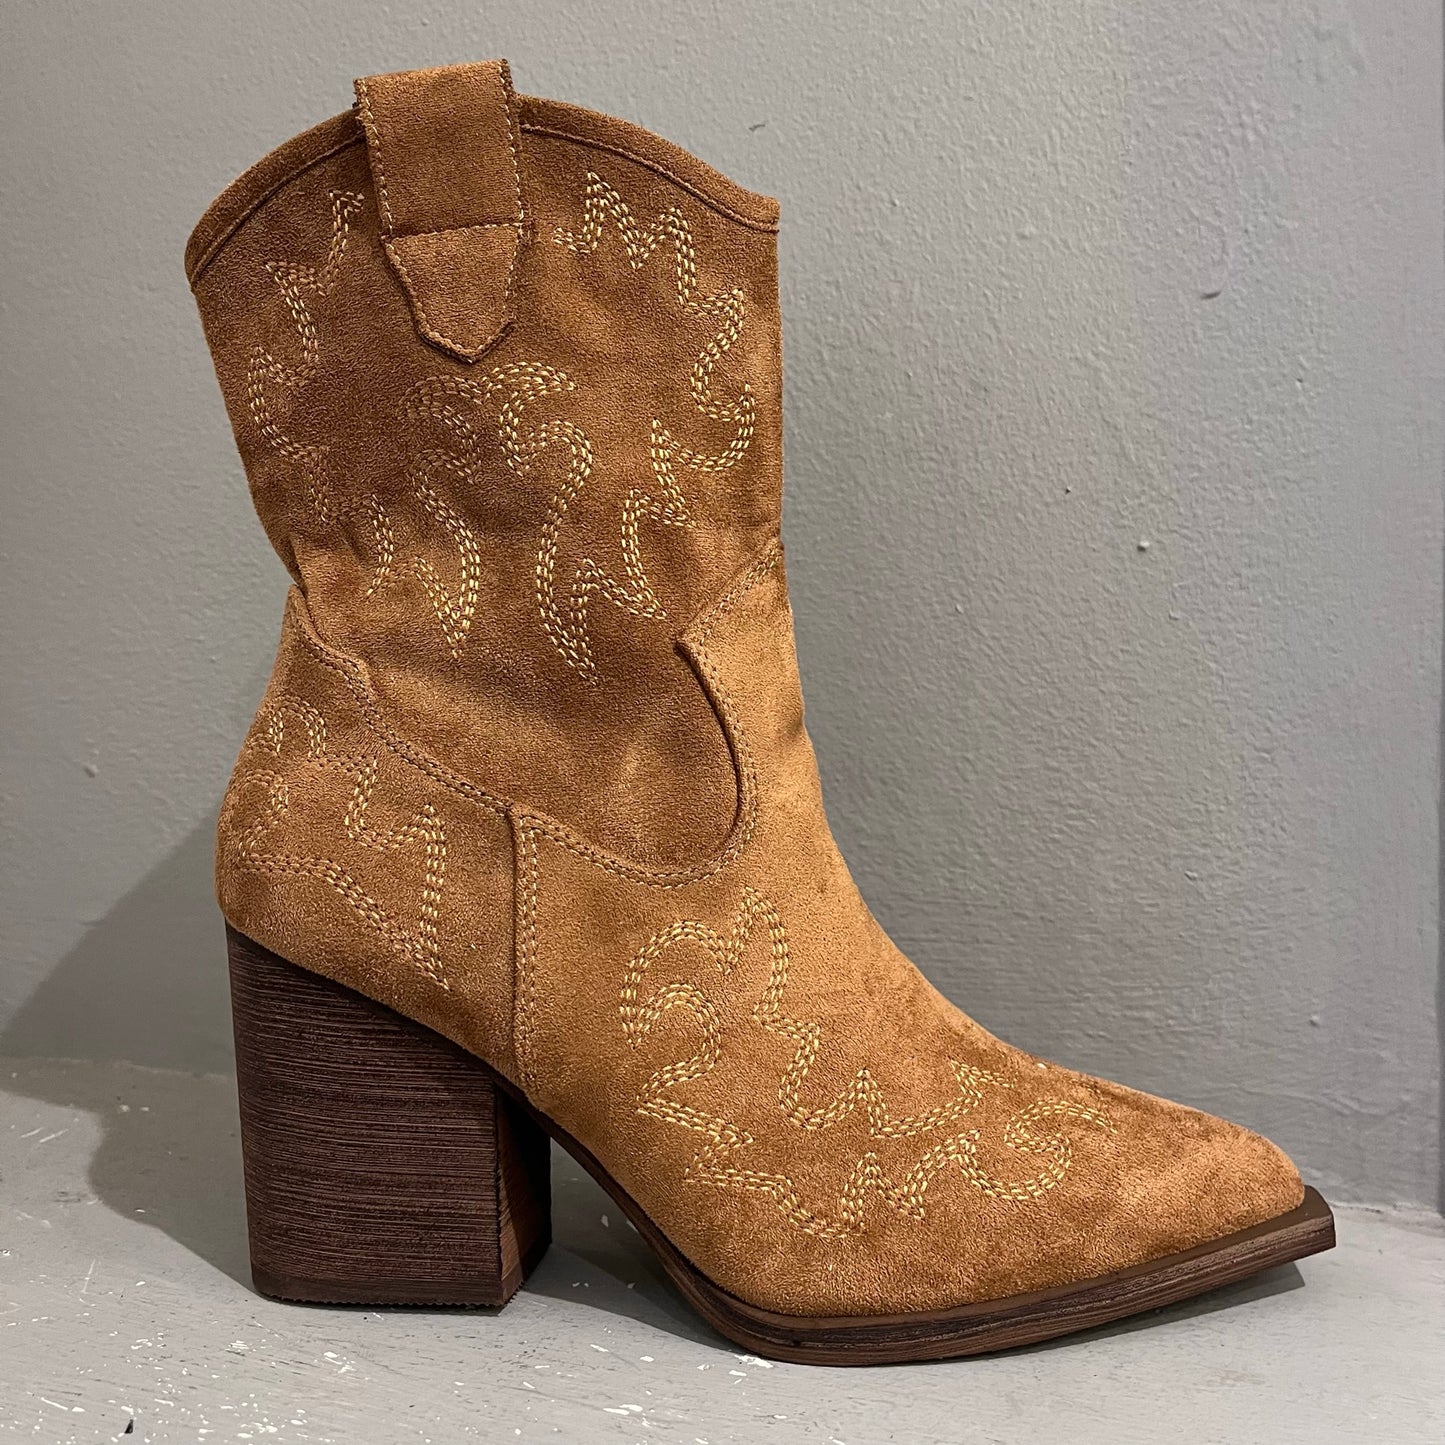 Western style boots - camel